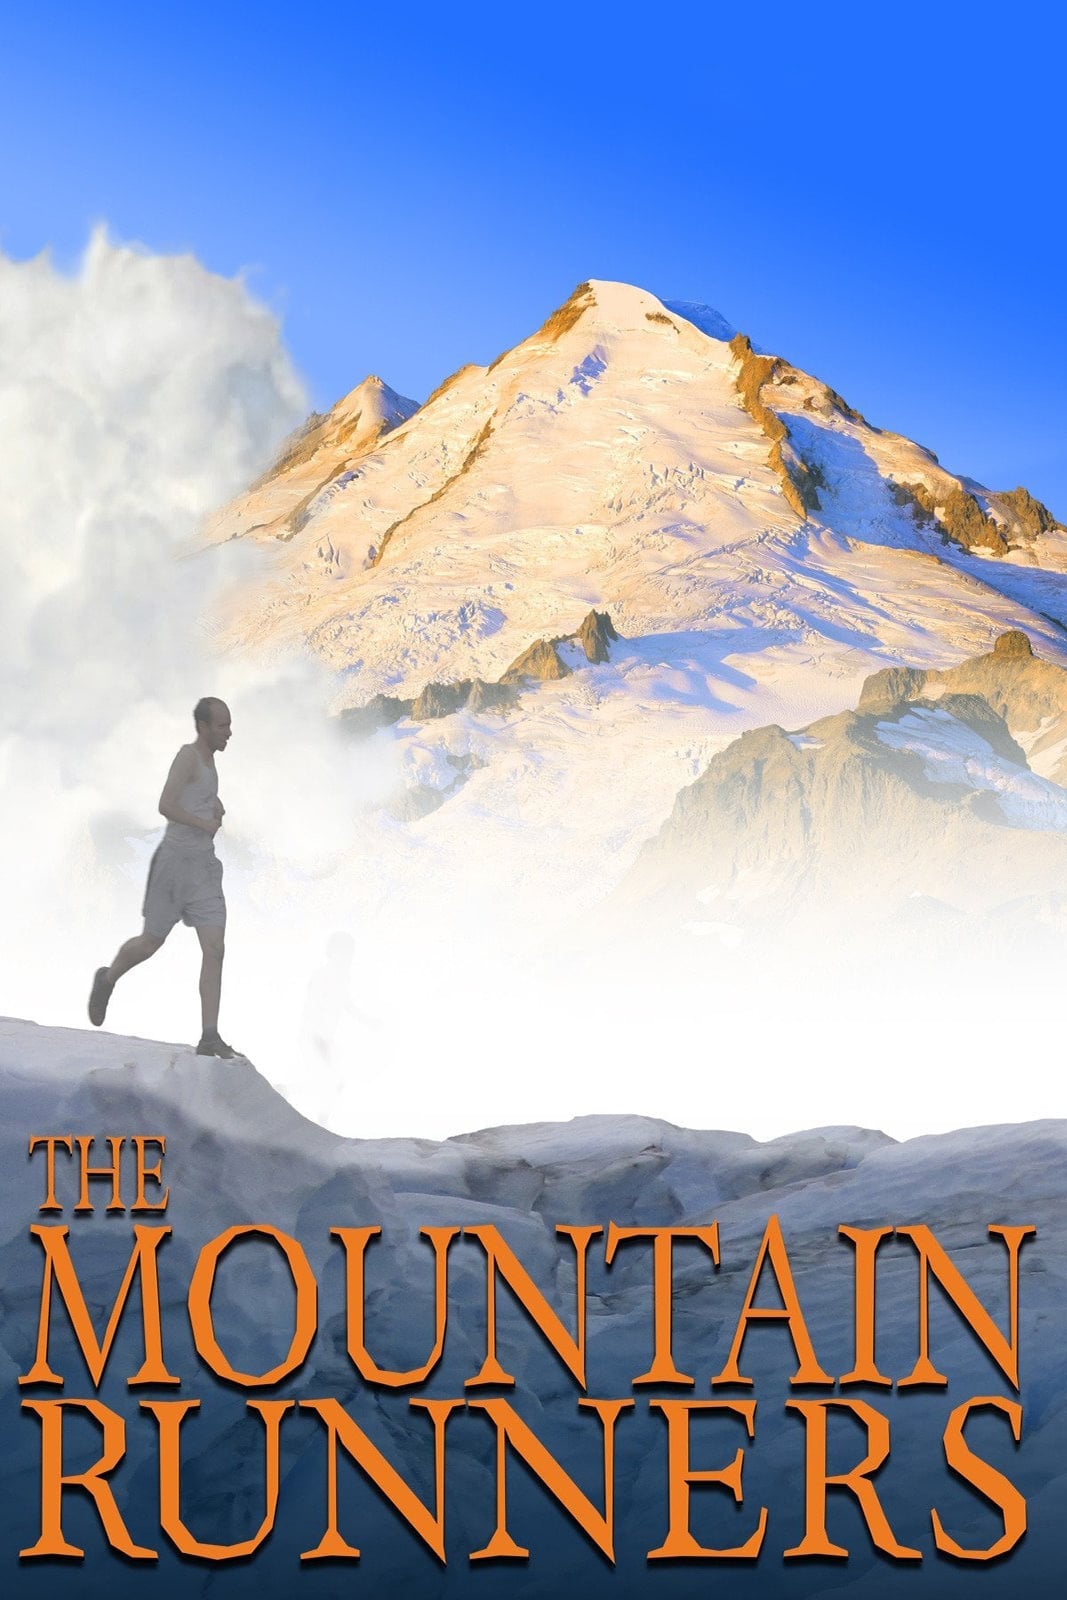 The Mountain Runners (2012)